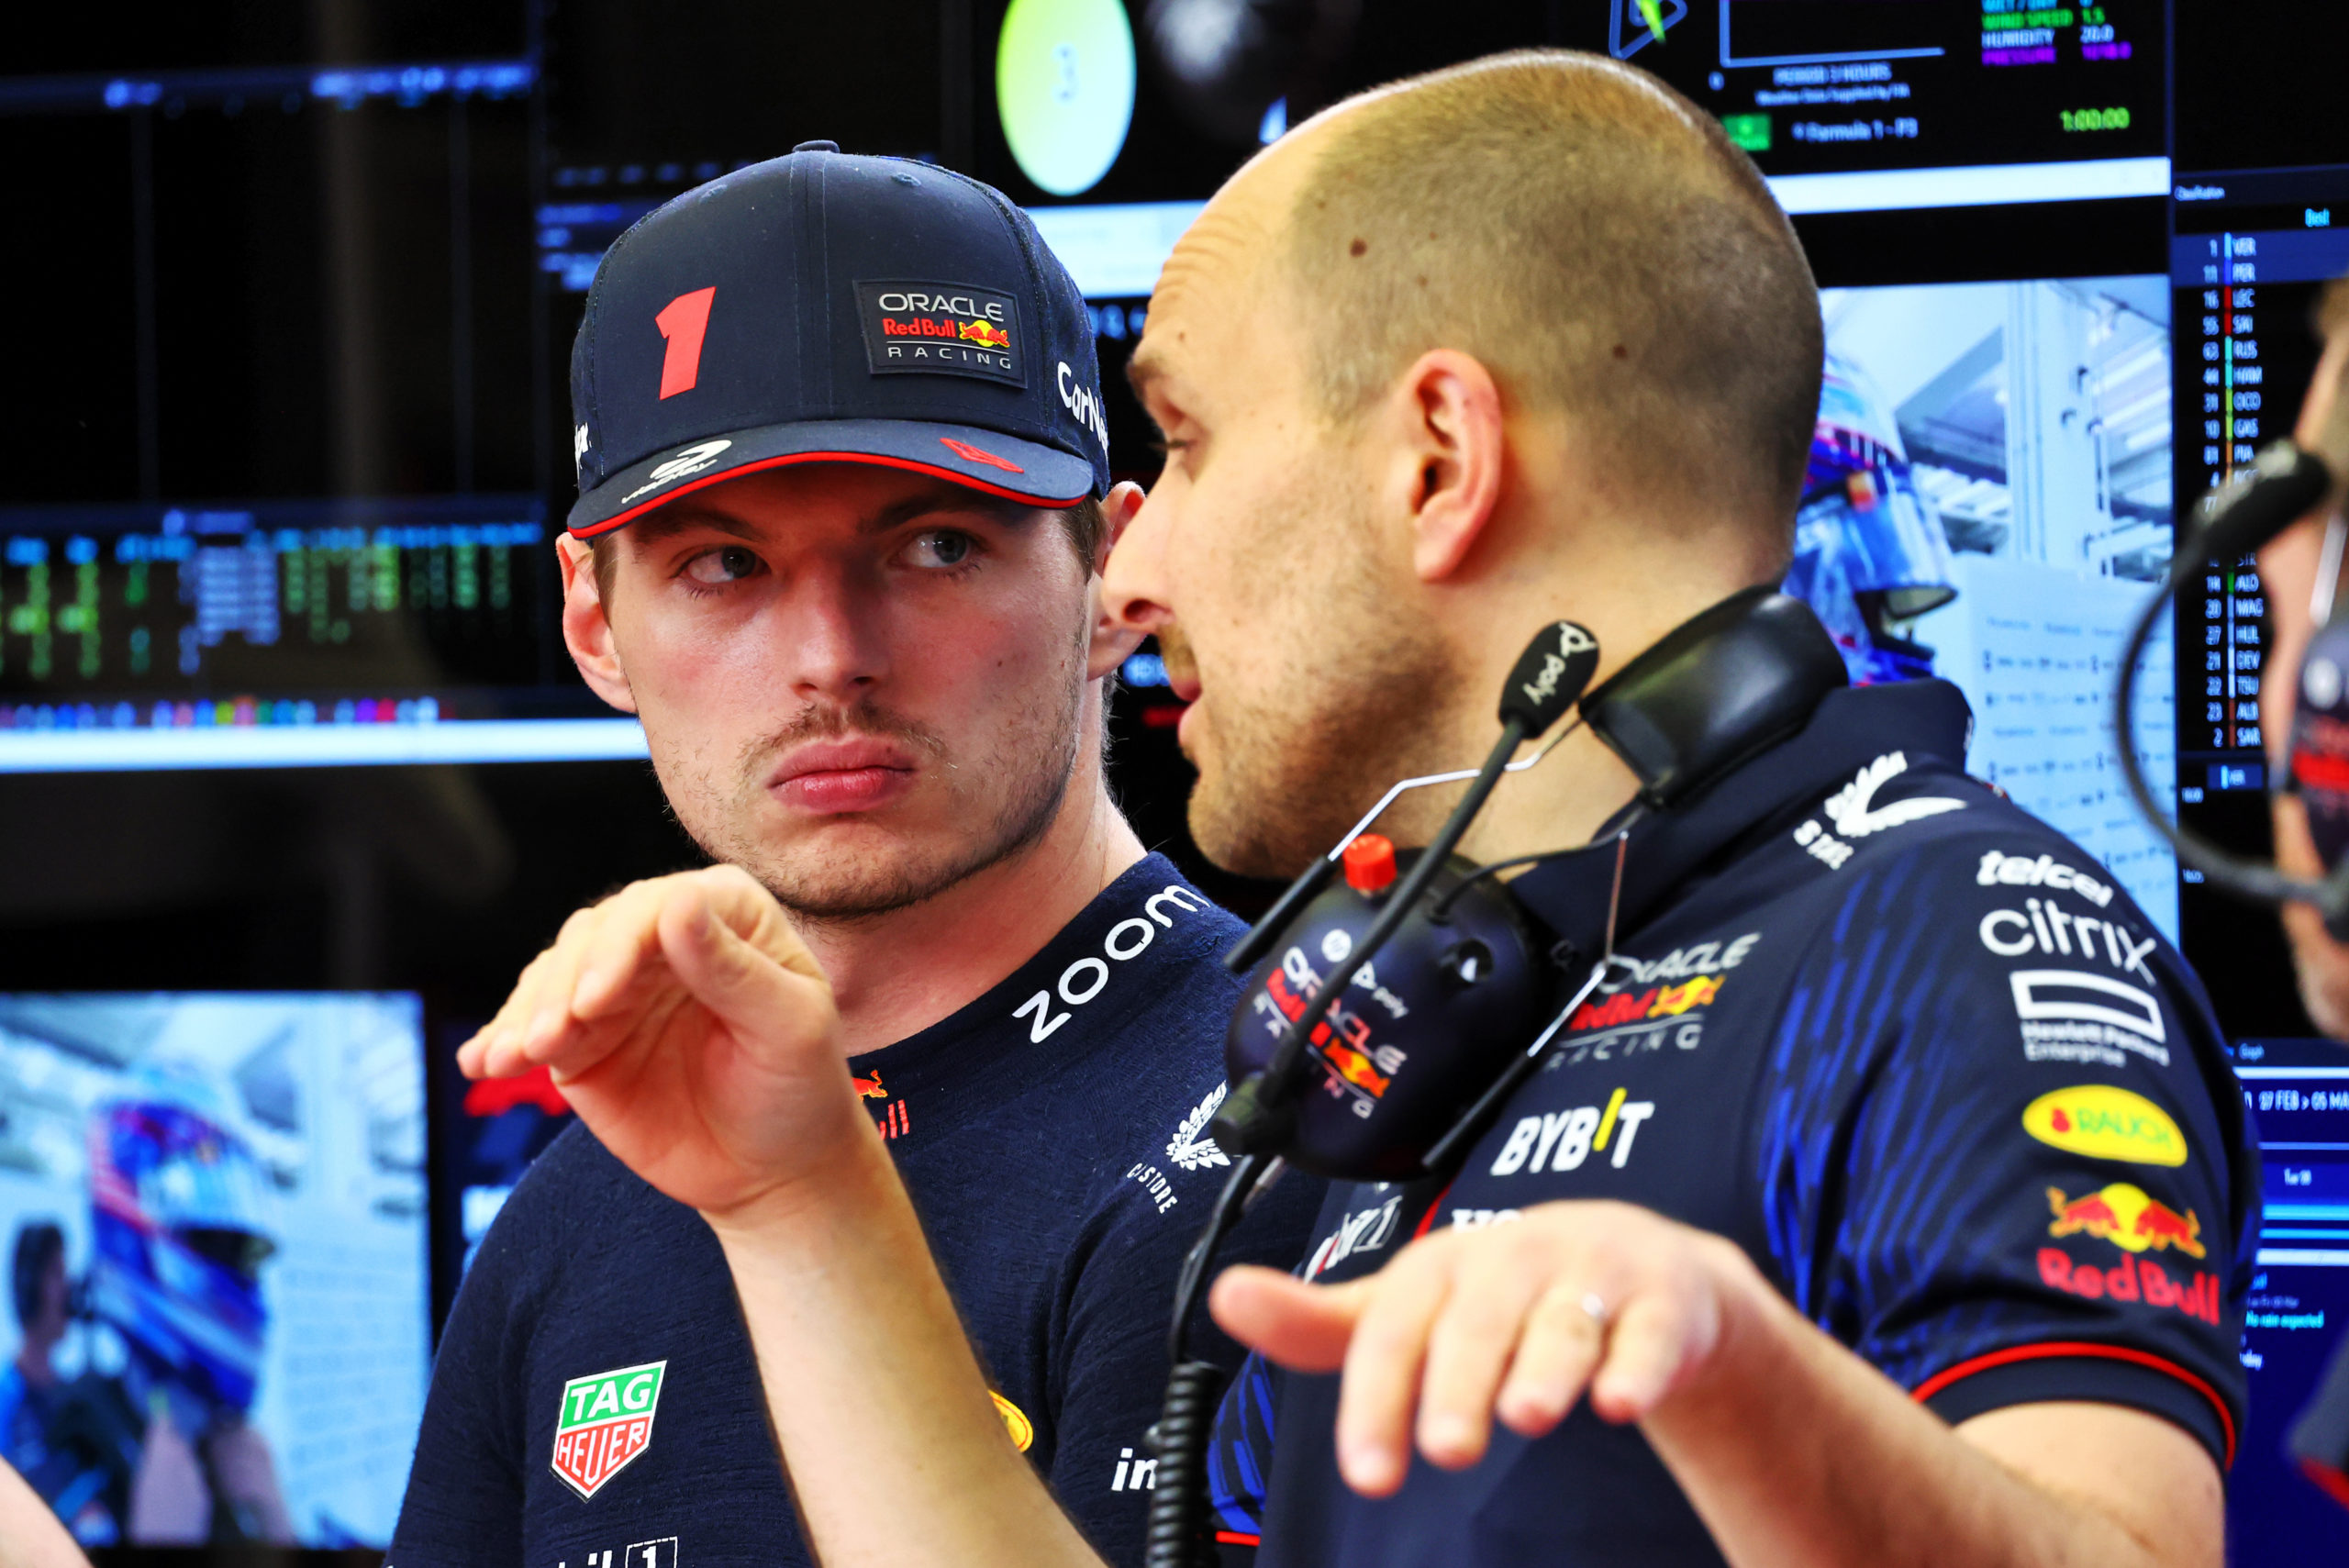 should red bull worry about terse verstappen/lambiase dynamic?